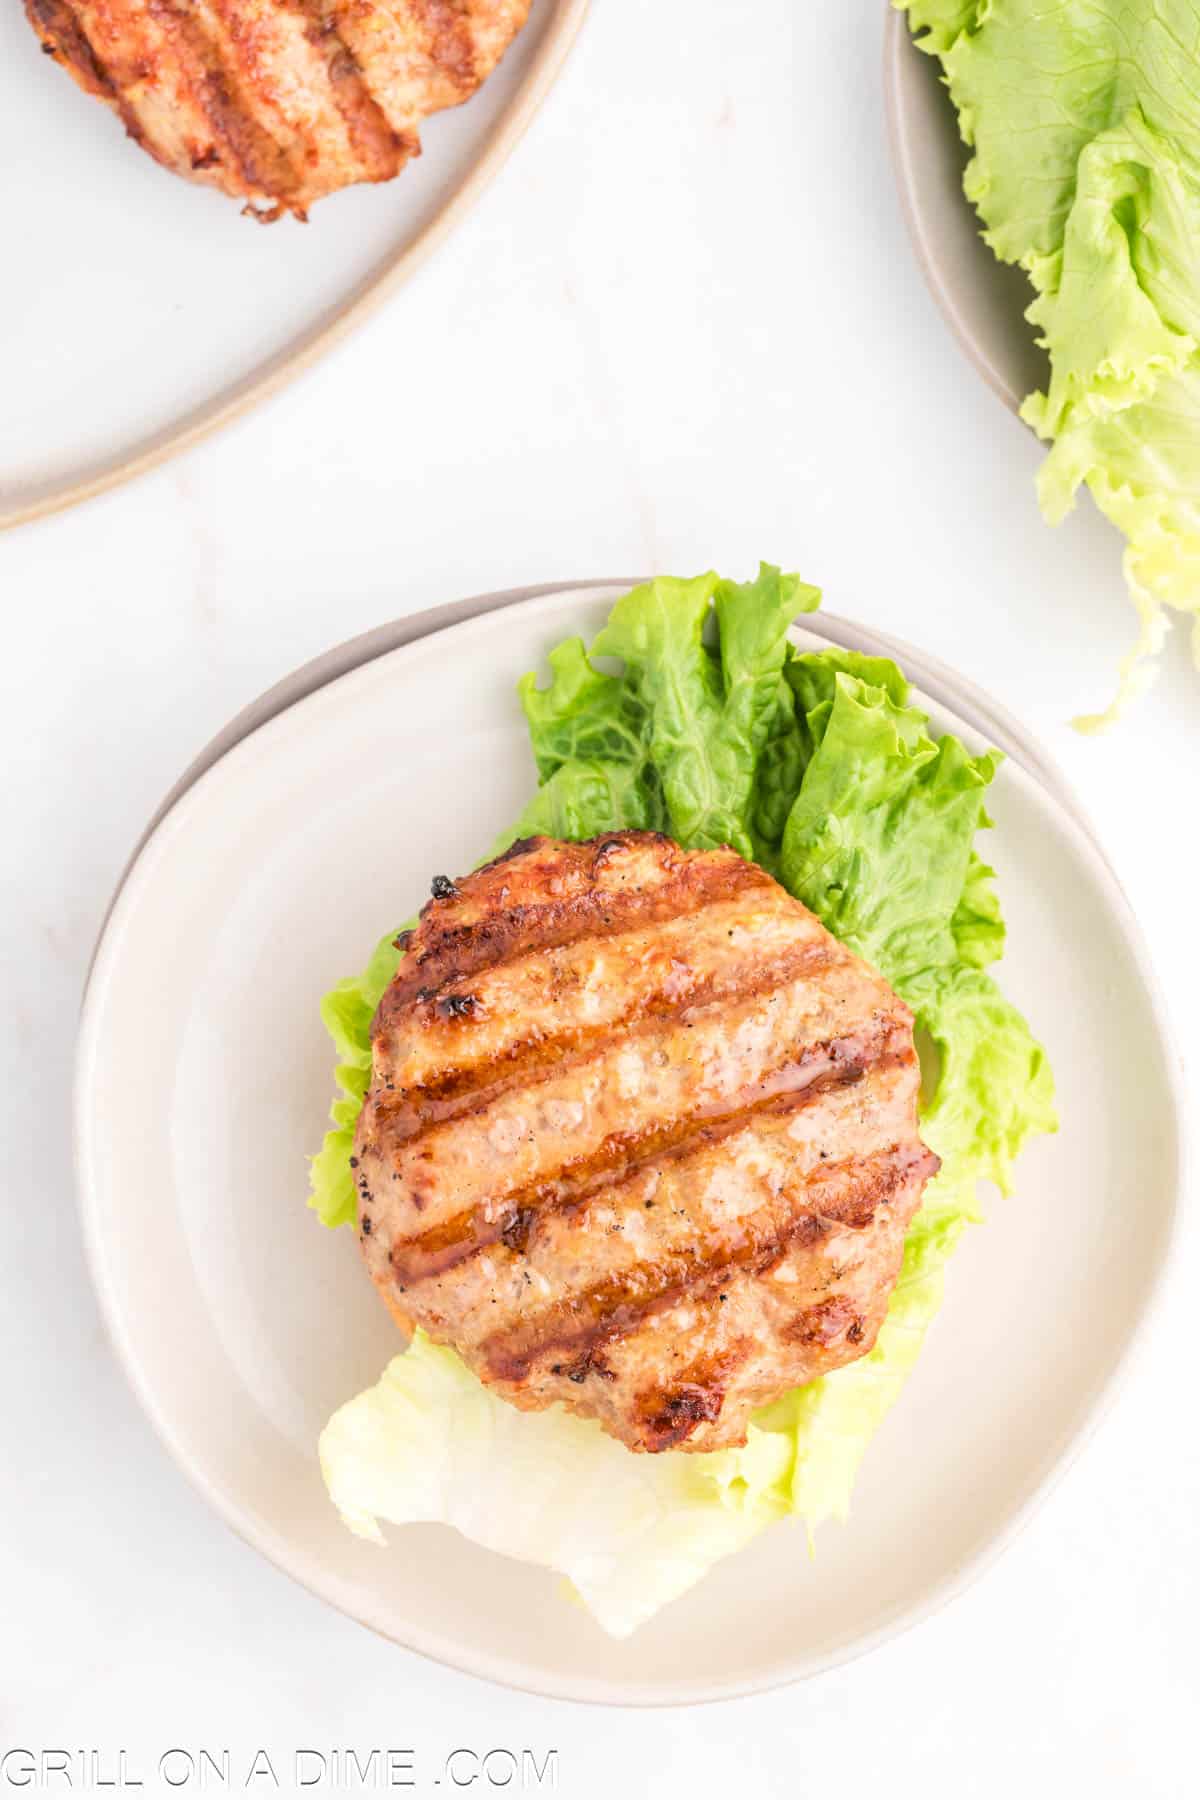 topping the lettuce with ground turkey pattie